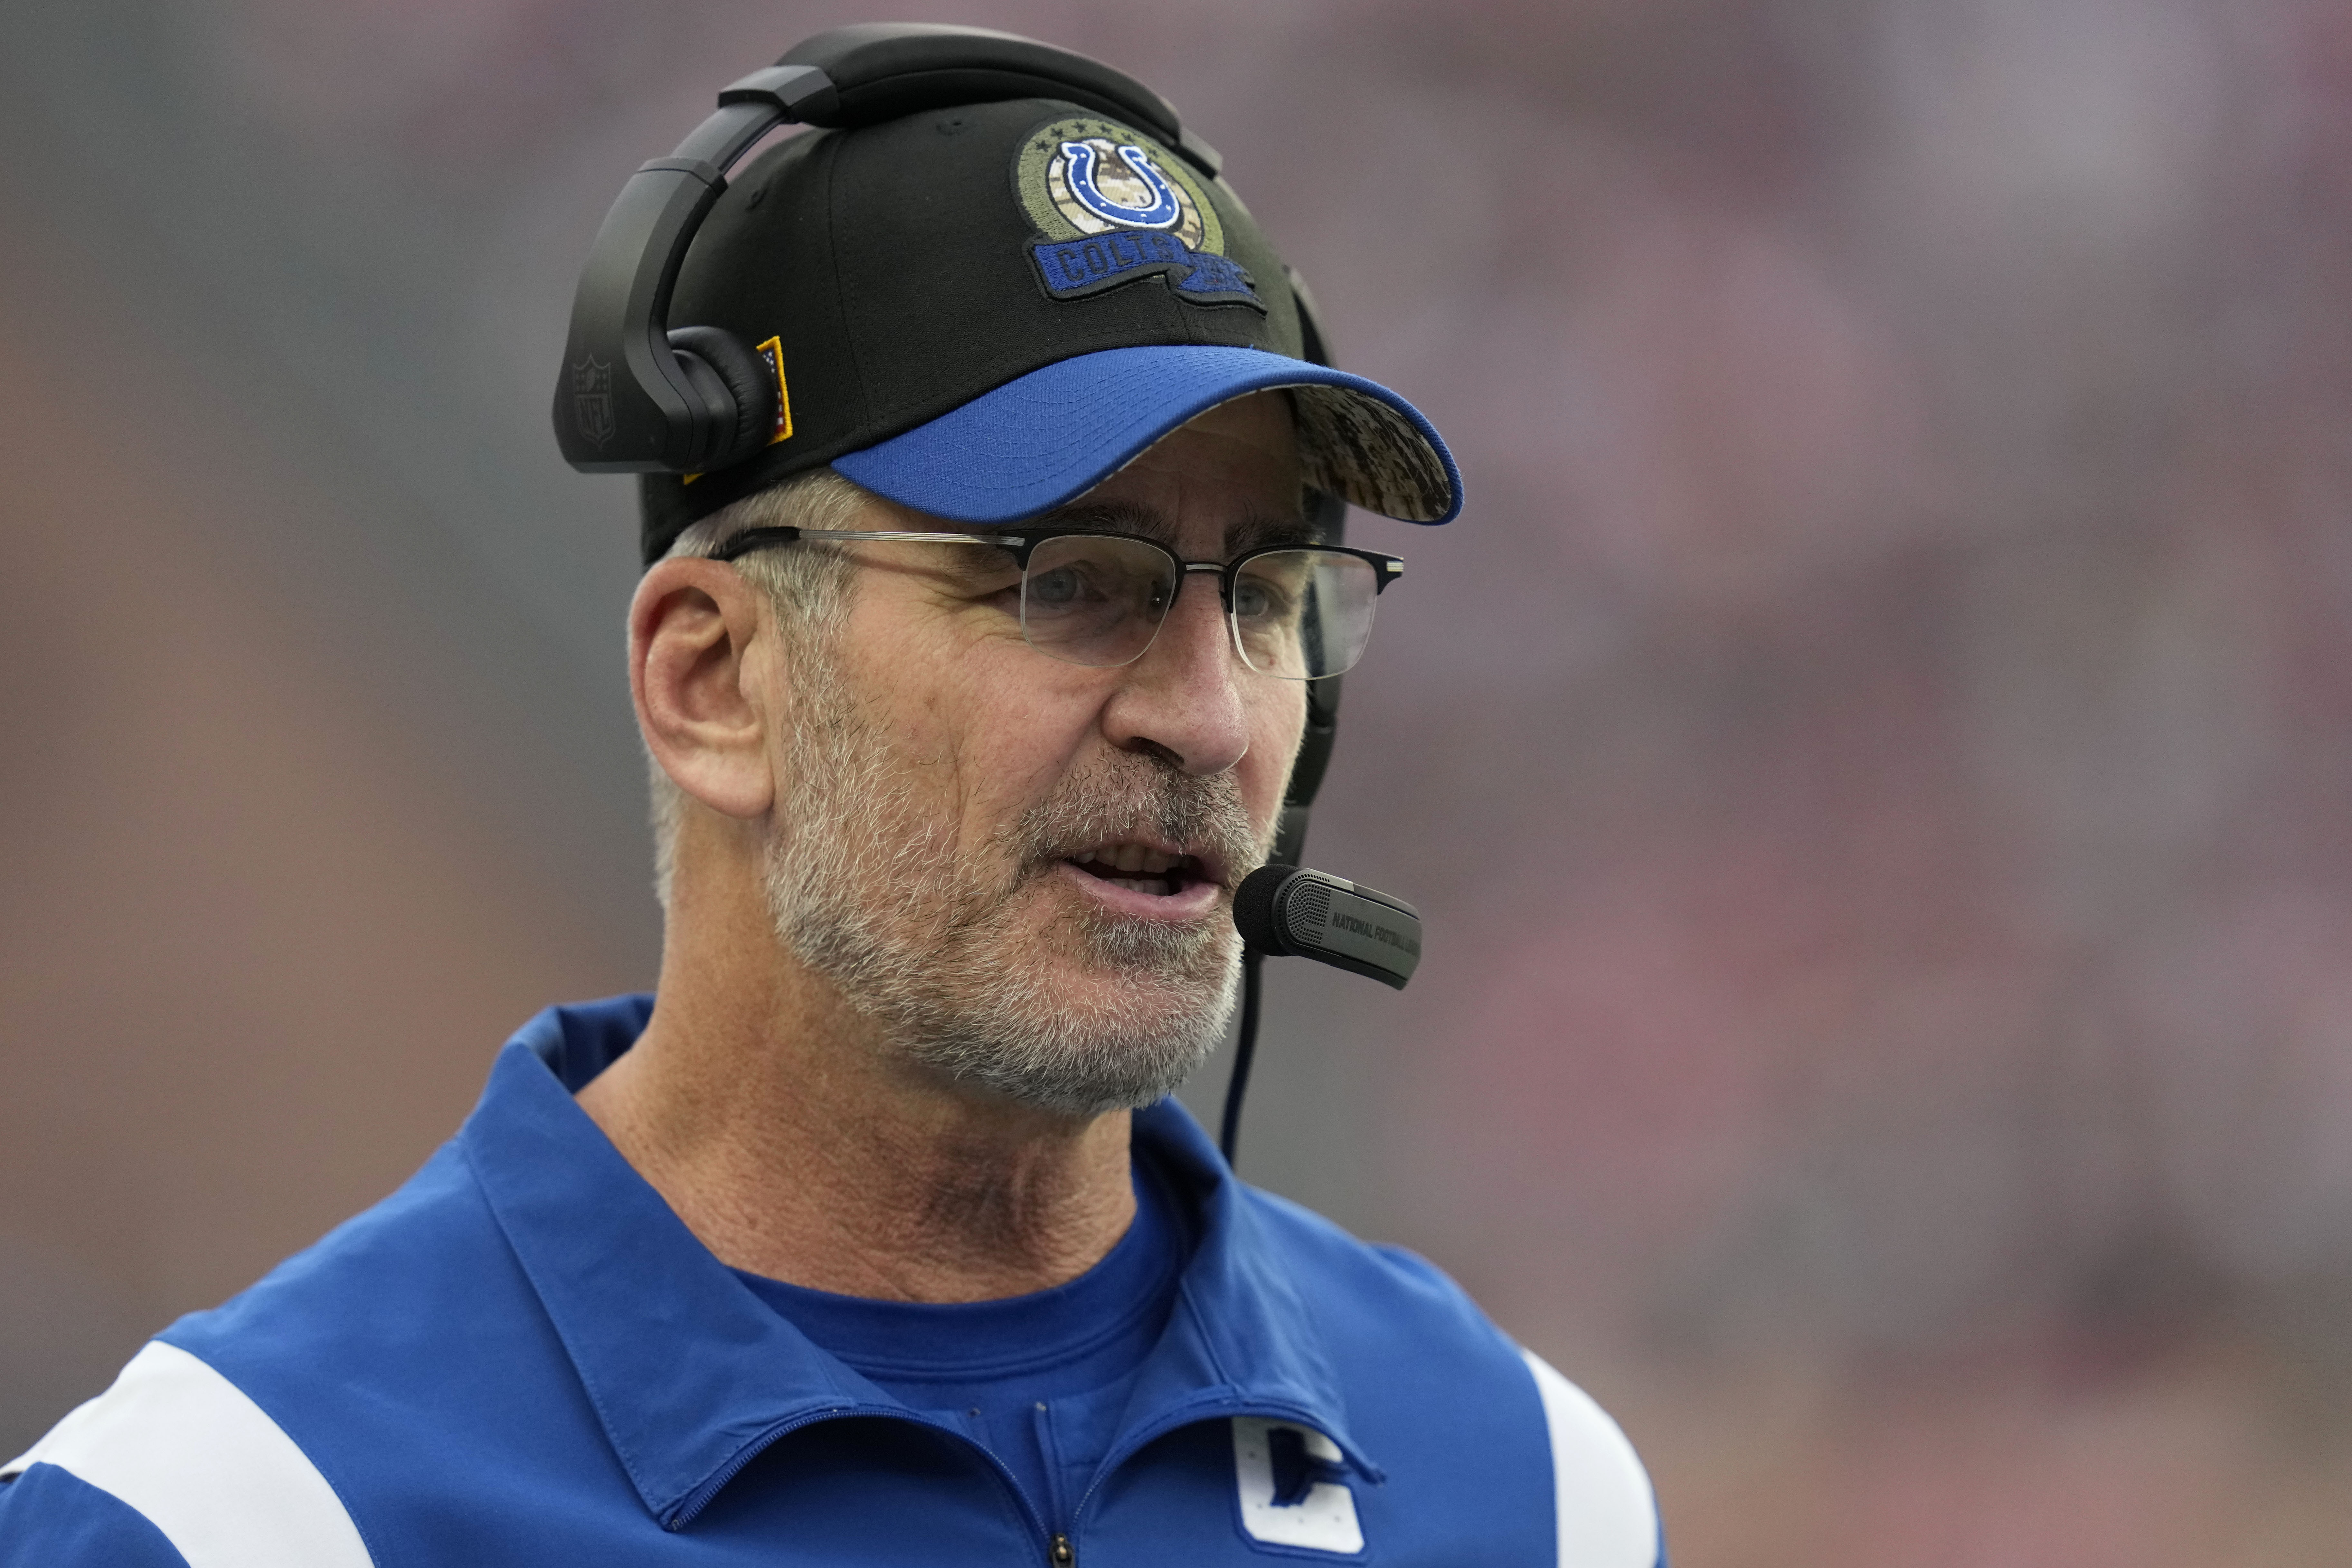 Indianapolis Colts fire head coach Frank Reich, Jeff Saturday named interim